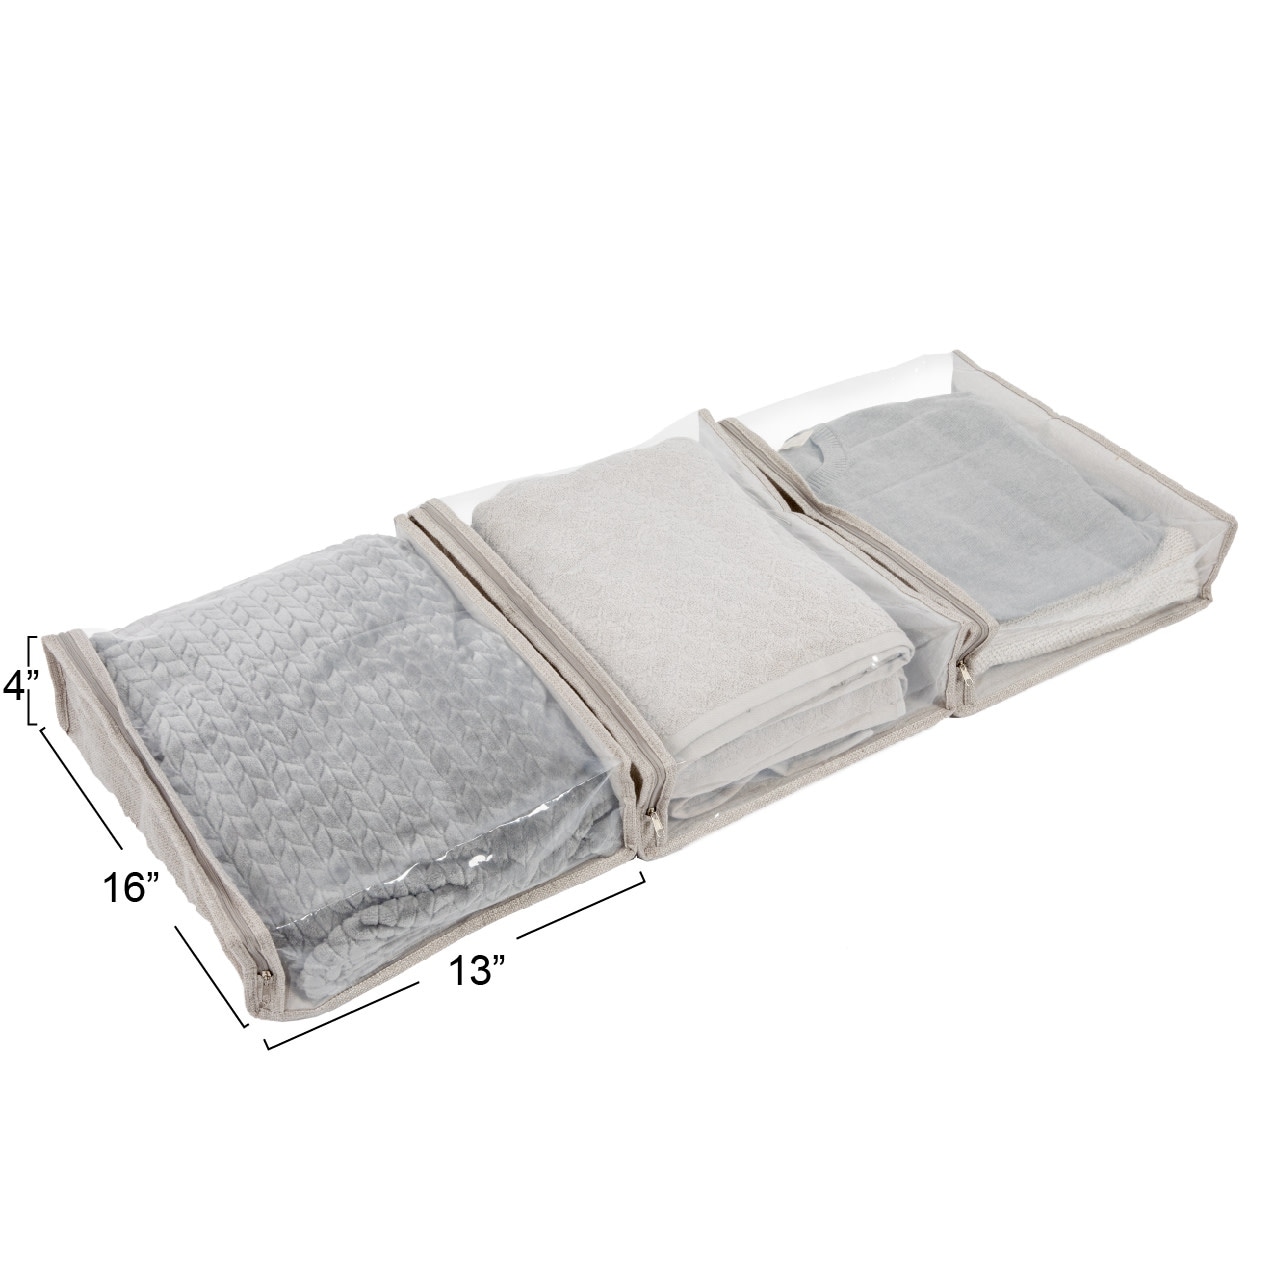 Zippered Sweater Storage Bags with Clear Vision Panel - 16.0L x